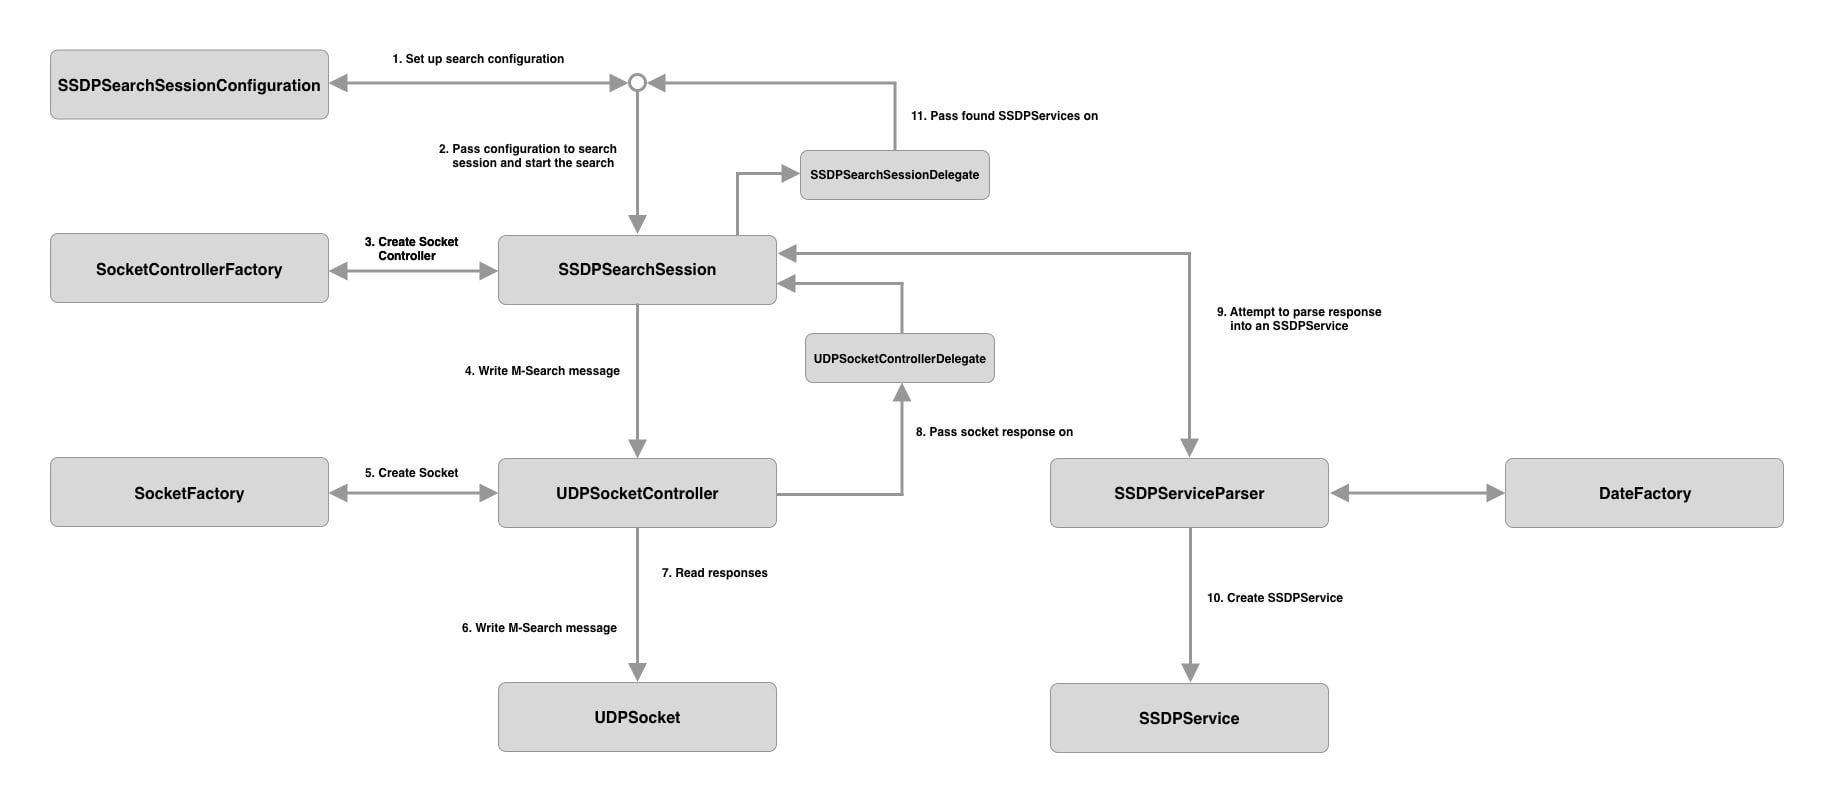 Class diagram showing the completed SSDP Discovery system